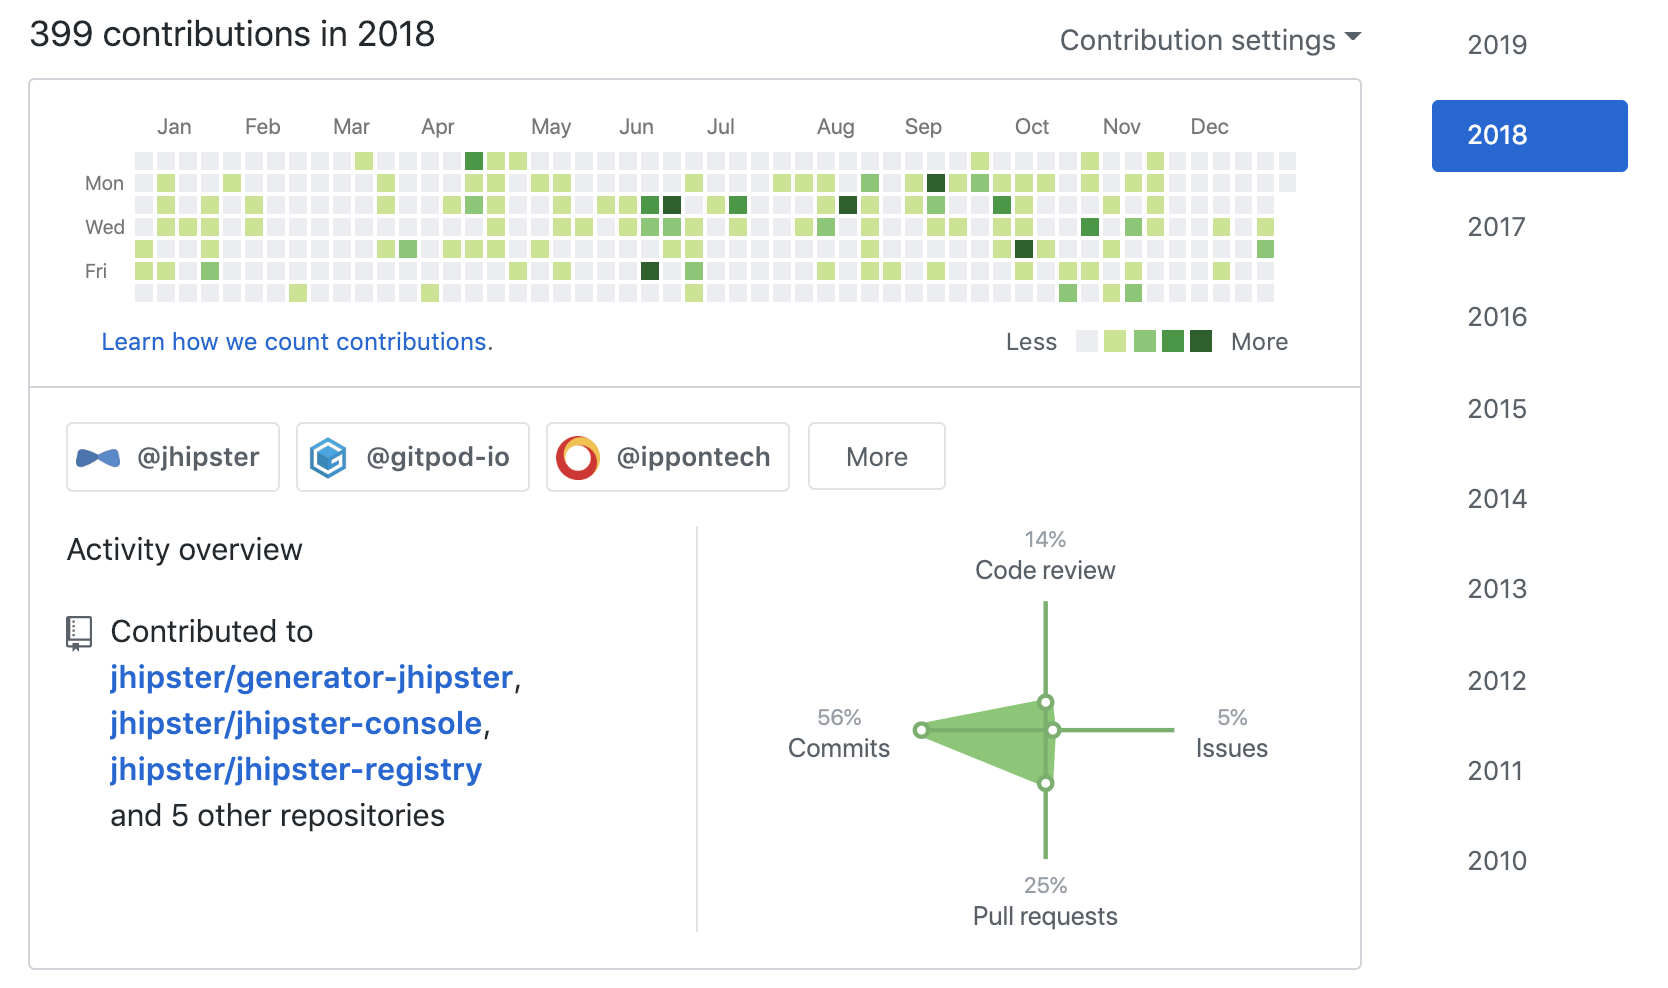 My contributions to open source in 2018